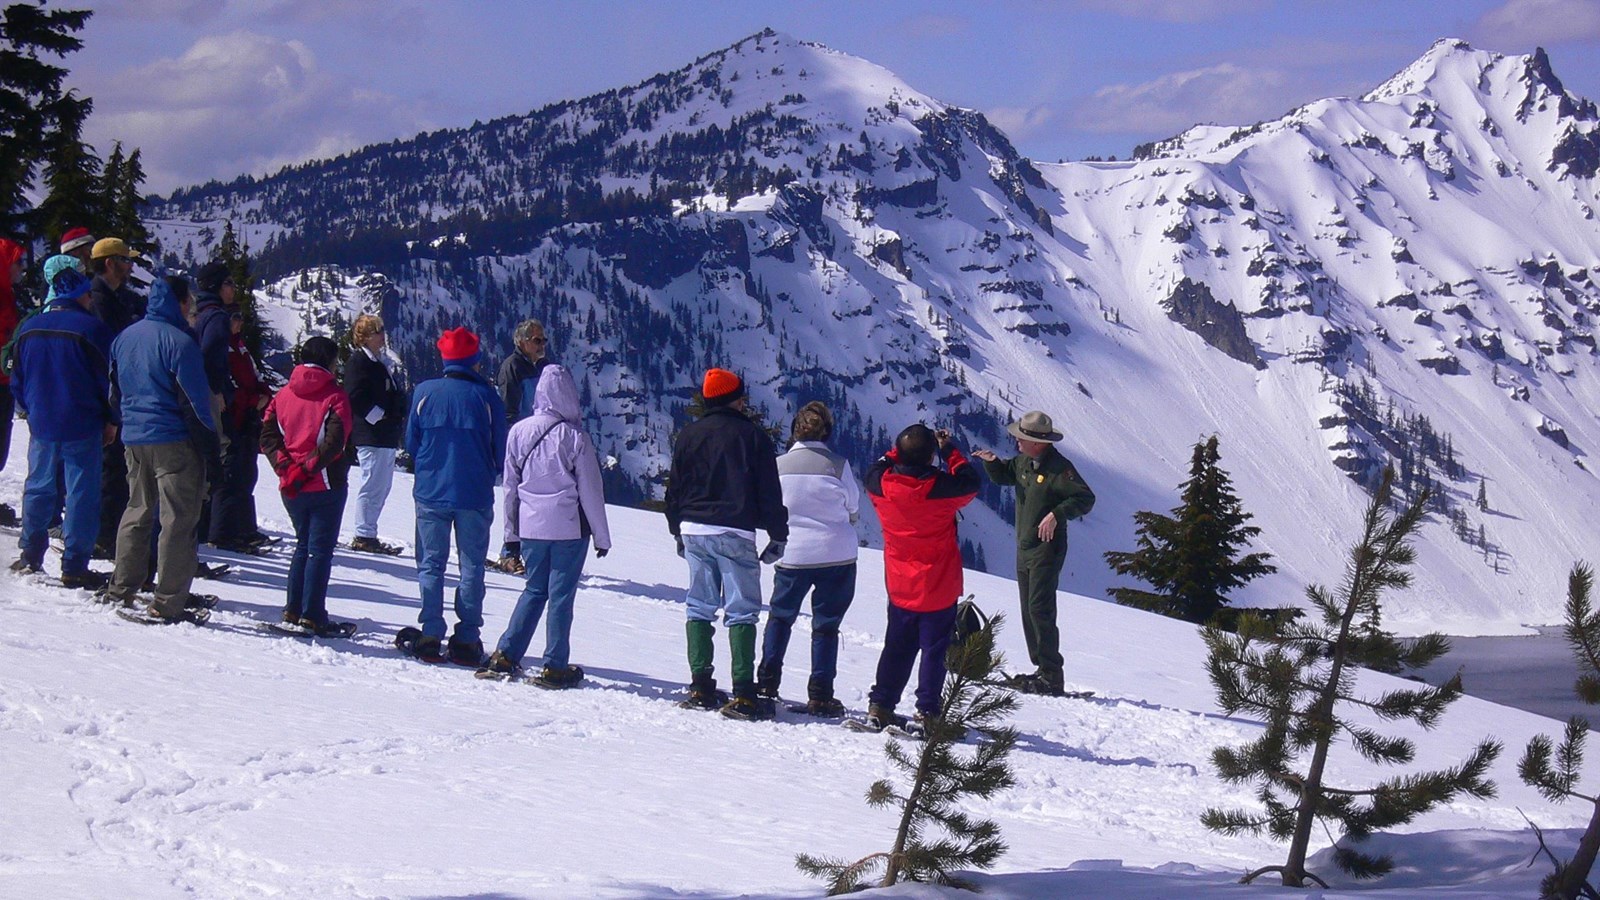 On a winter day, a ranger is encircled by visitors wearing snowshoes Crater Lake in the background